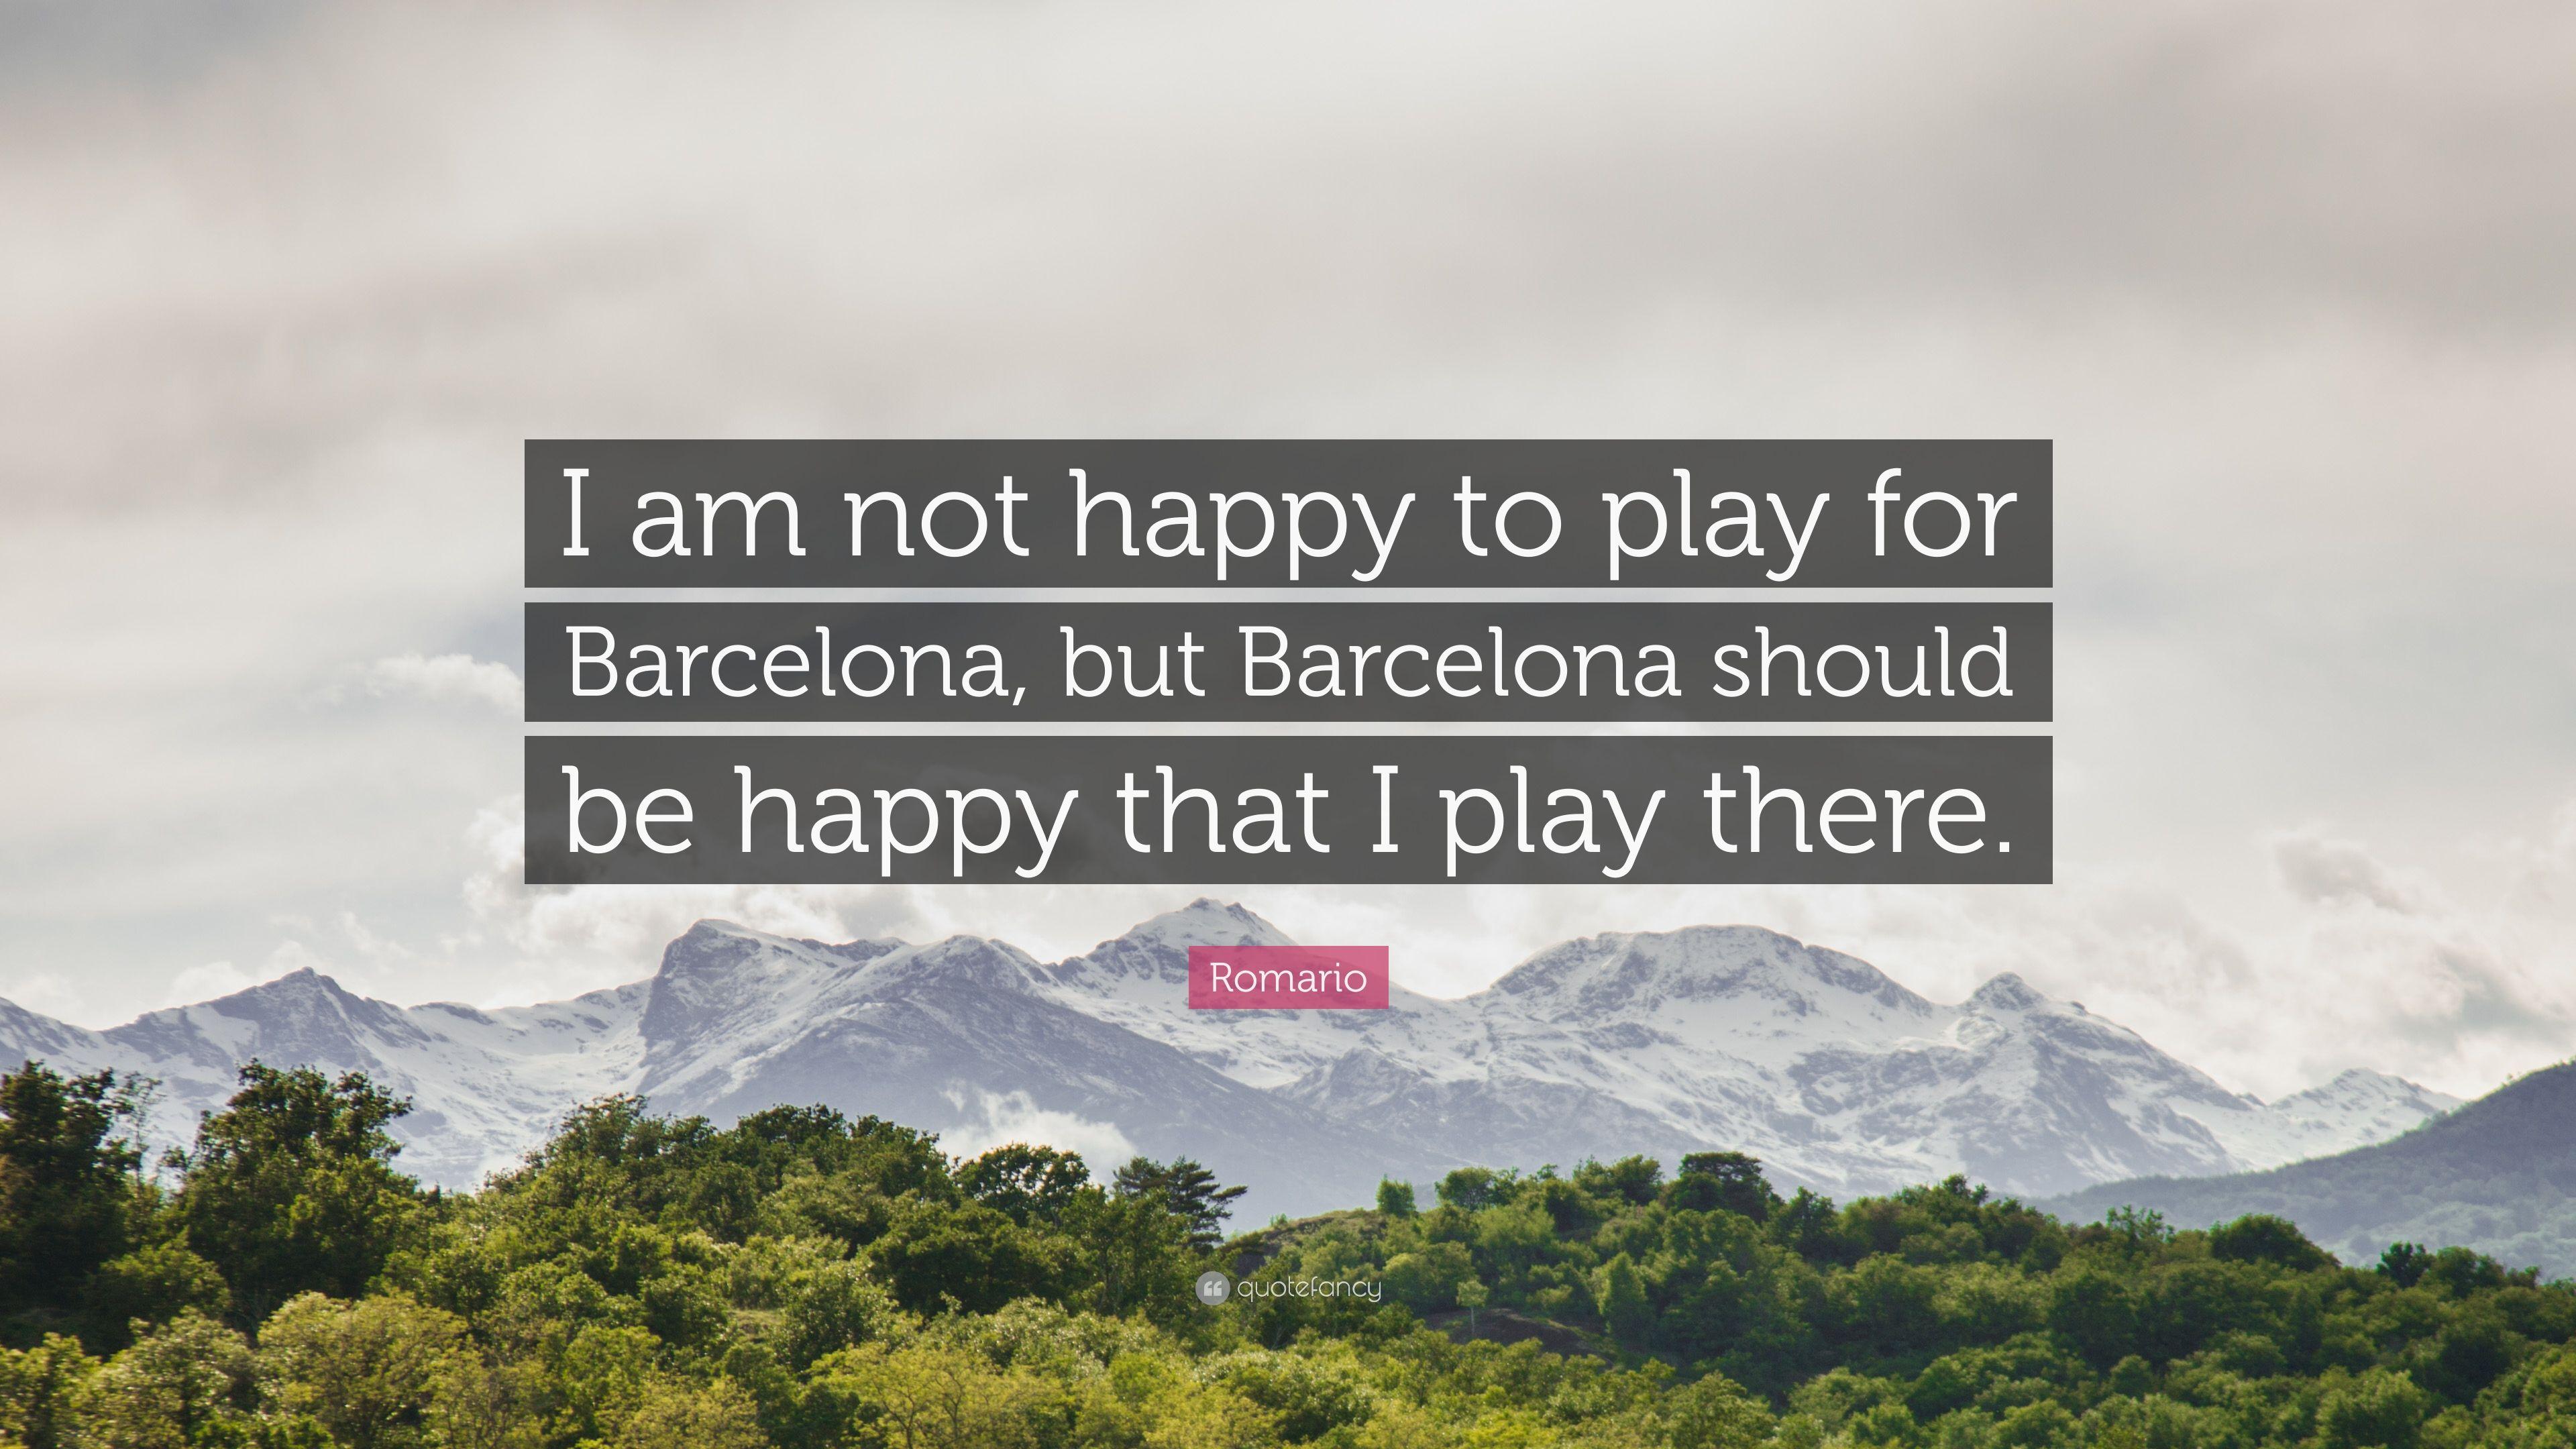 Romario Quote: “I am not happy to play for Barcelona, but Barcelona